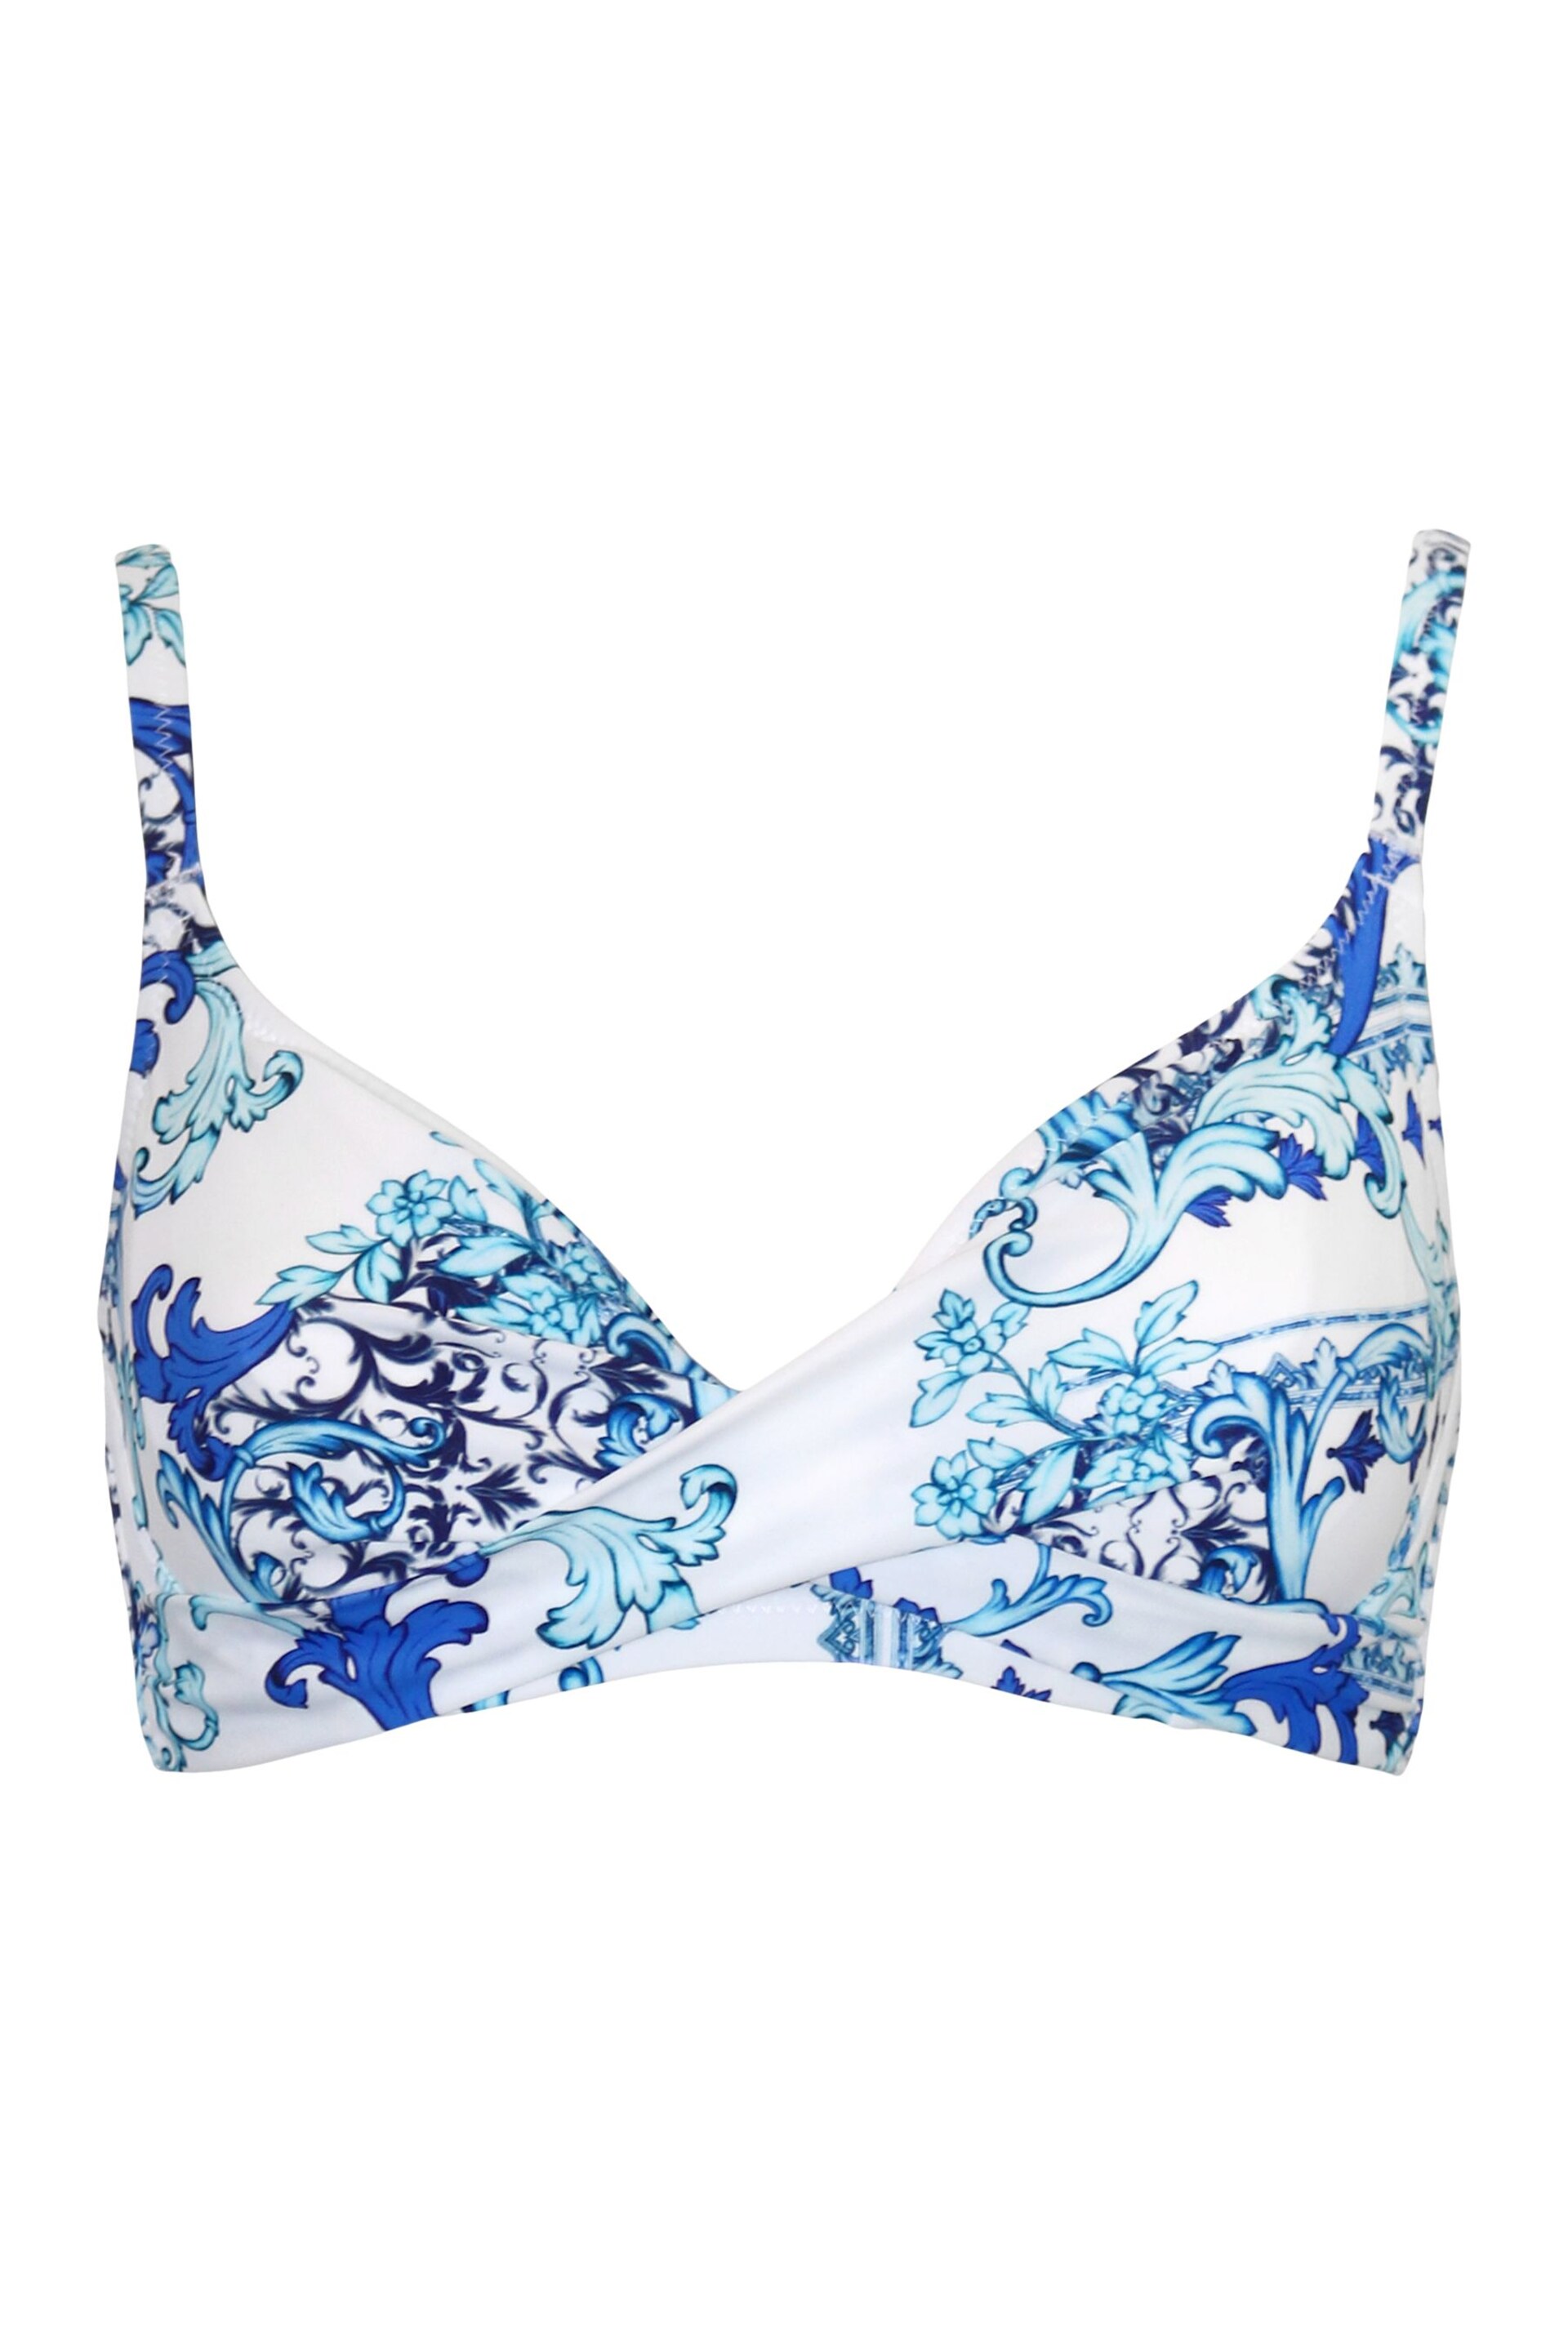 Pour Moi White/Blue Amalfi Underwired Non Padded Twist Front Top - Image 4 of 5